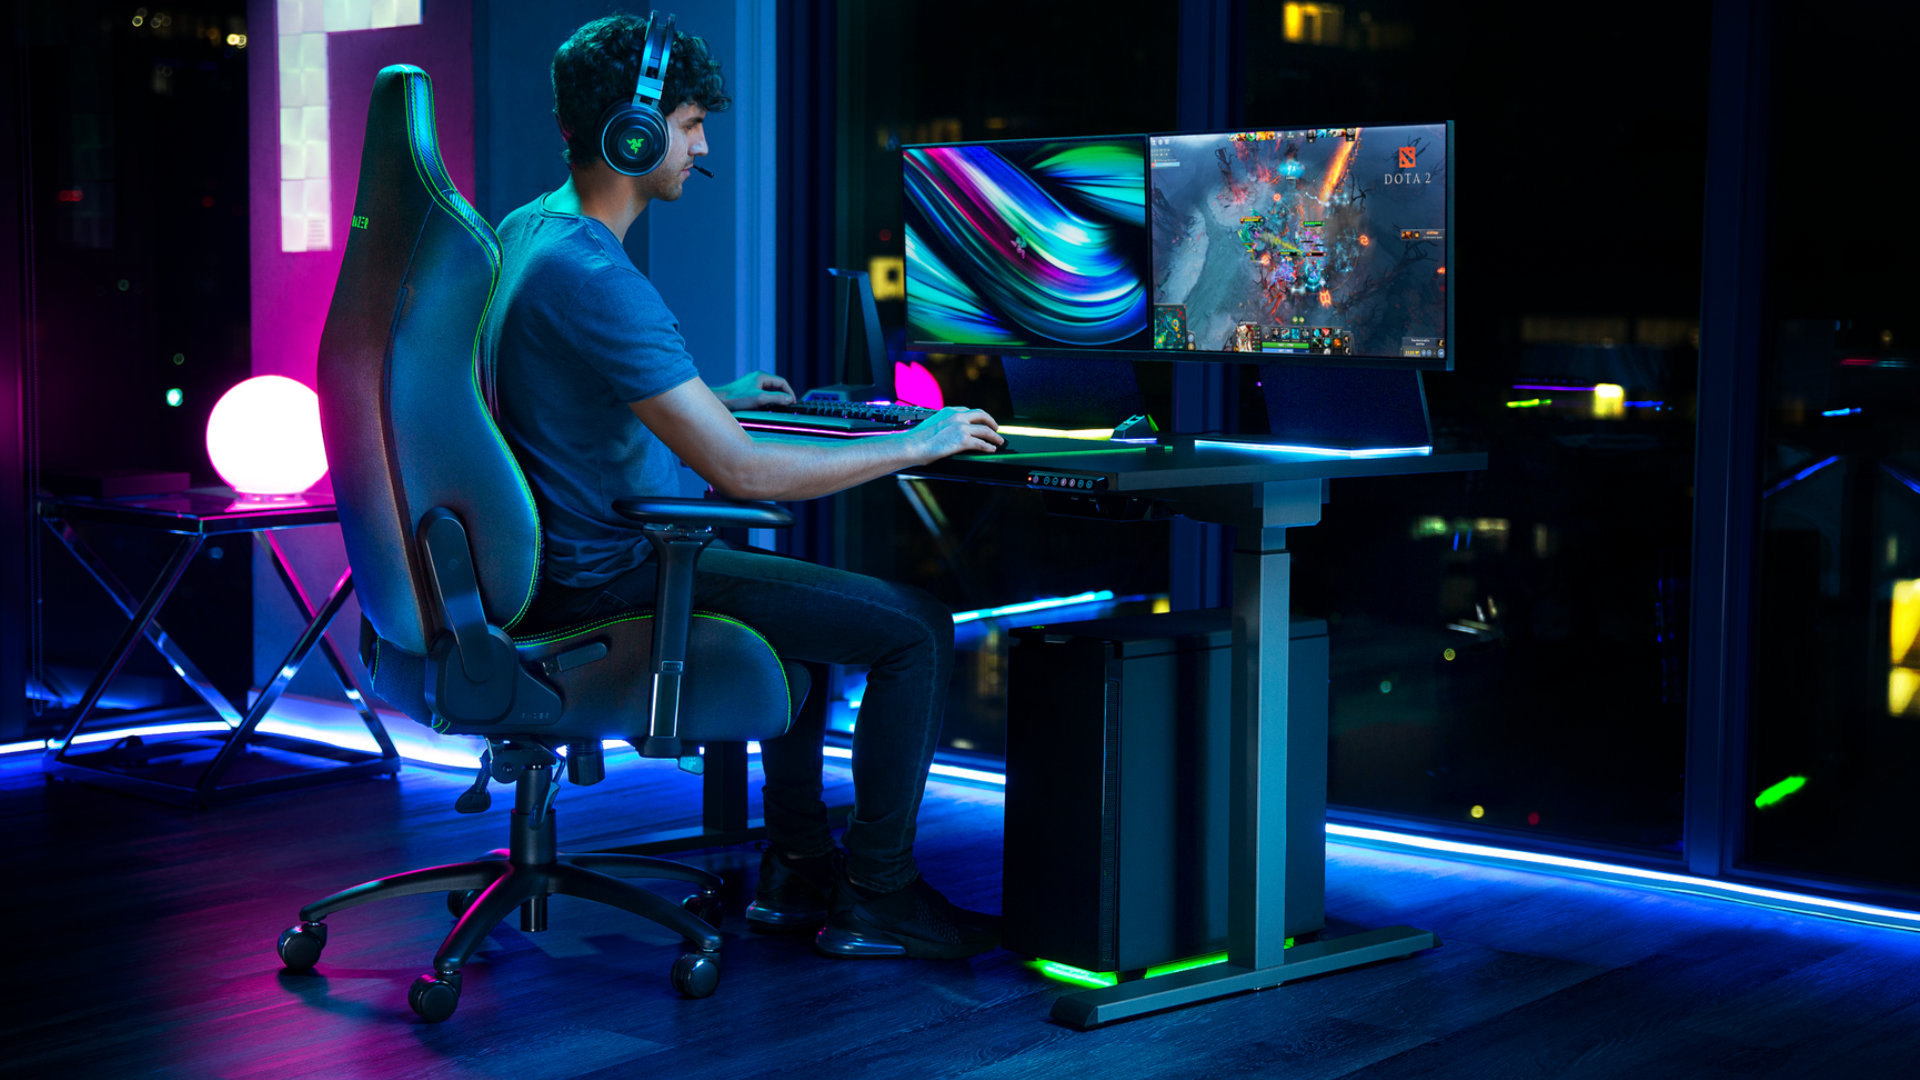 Best gaming chair 2021 – the top chairs to perch your posterior on